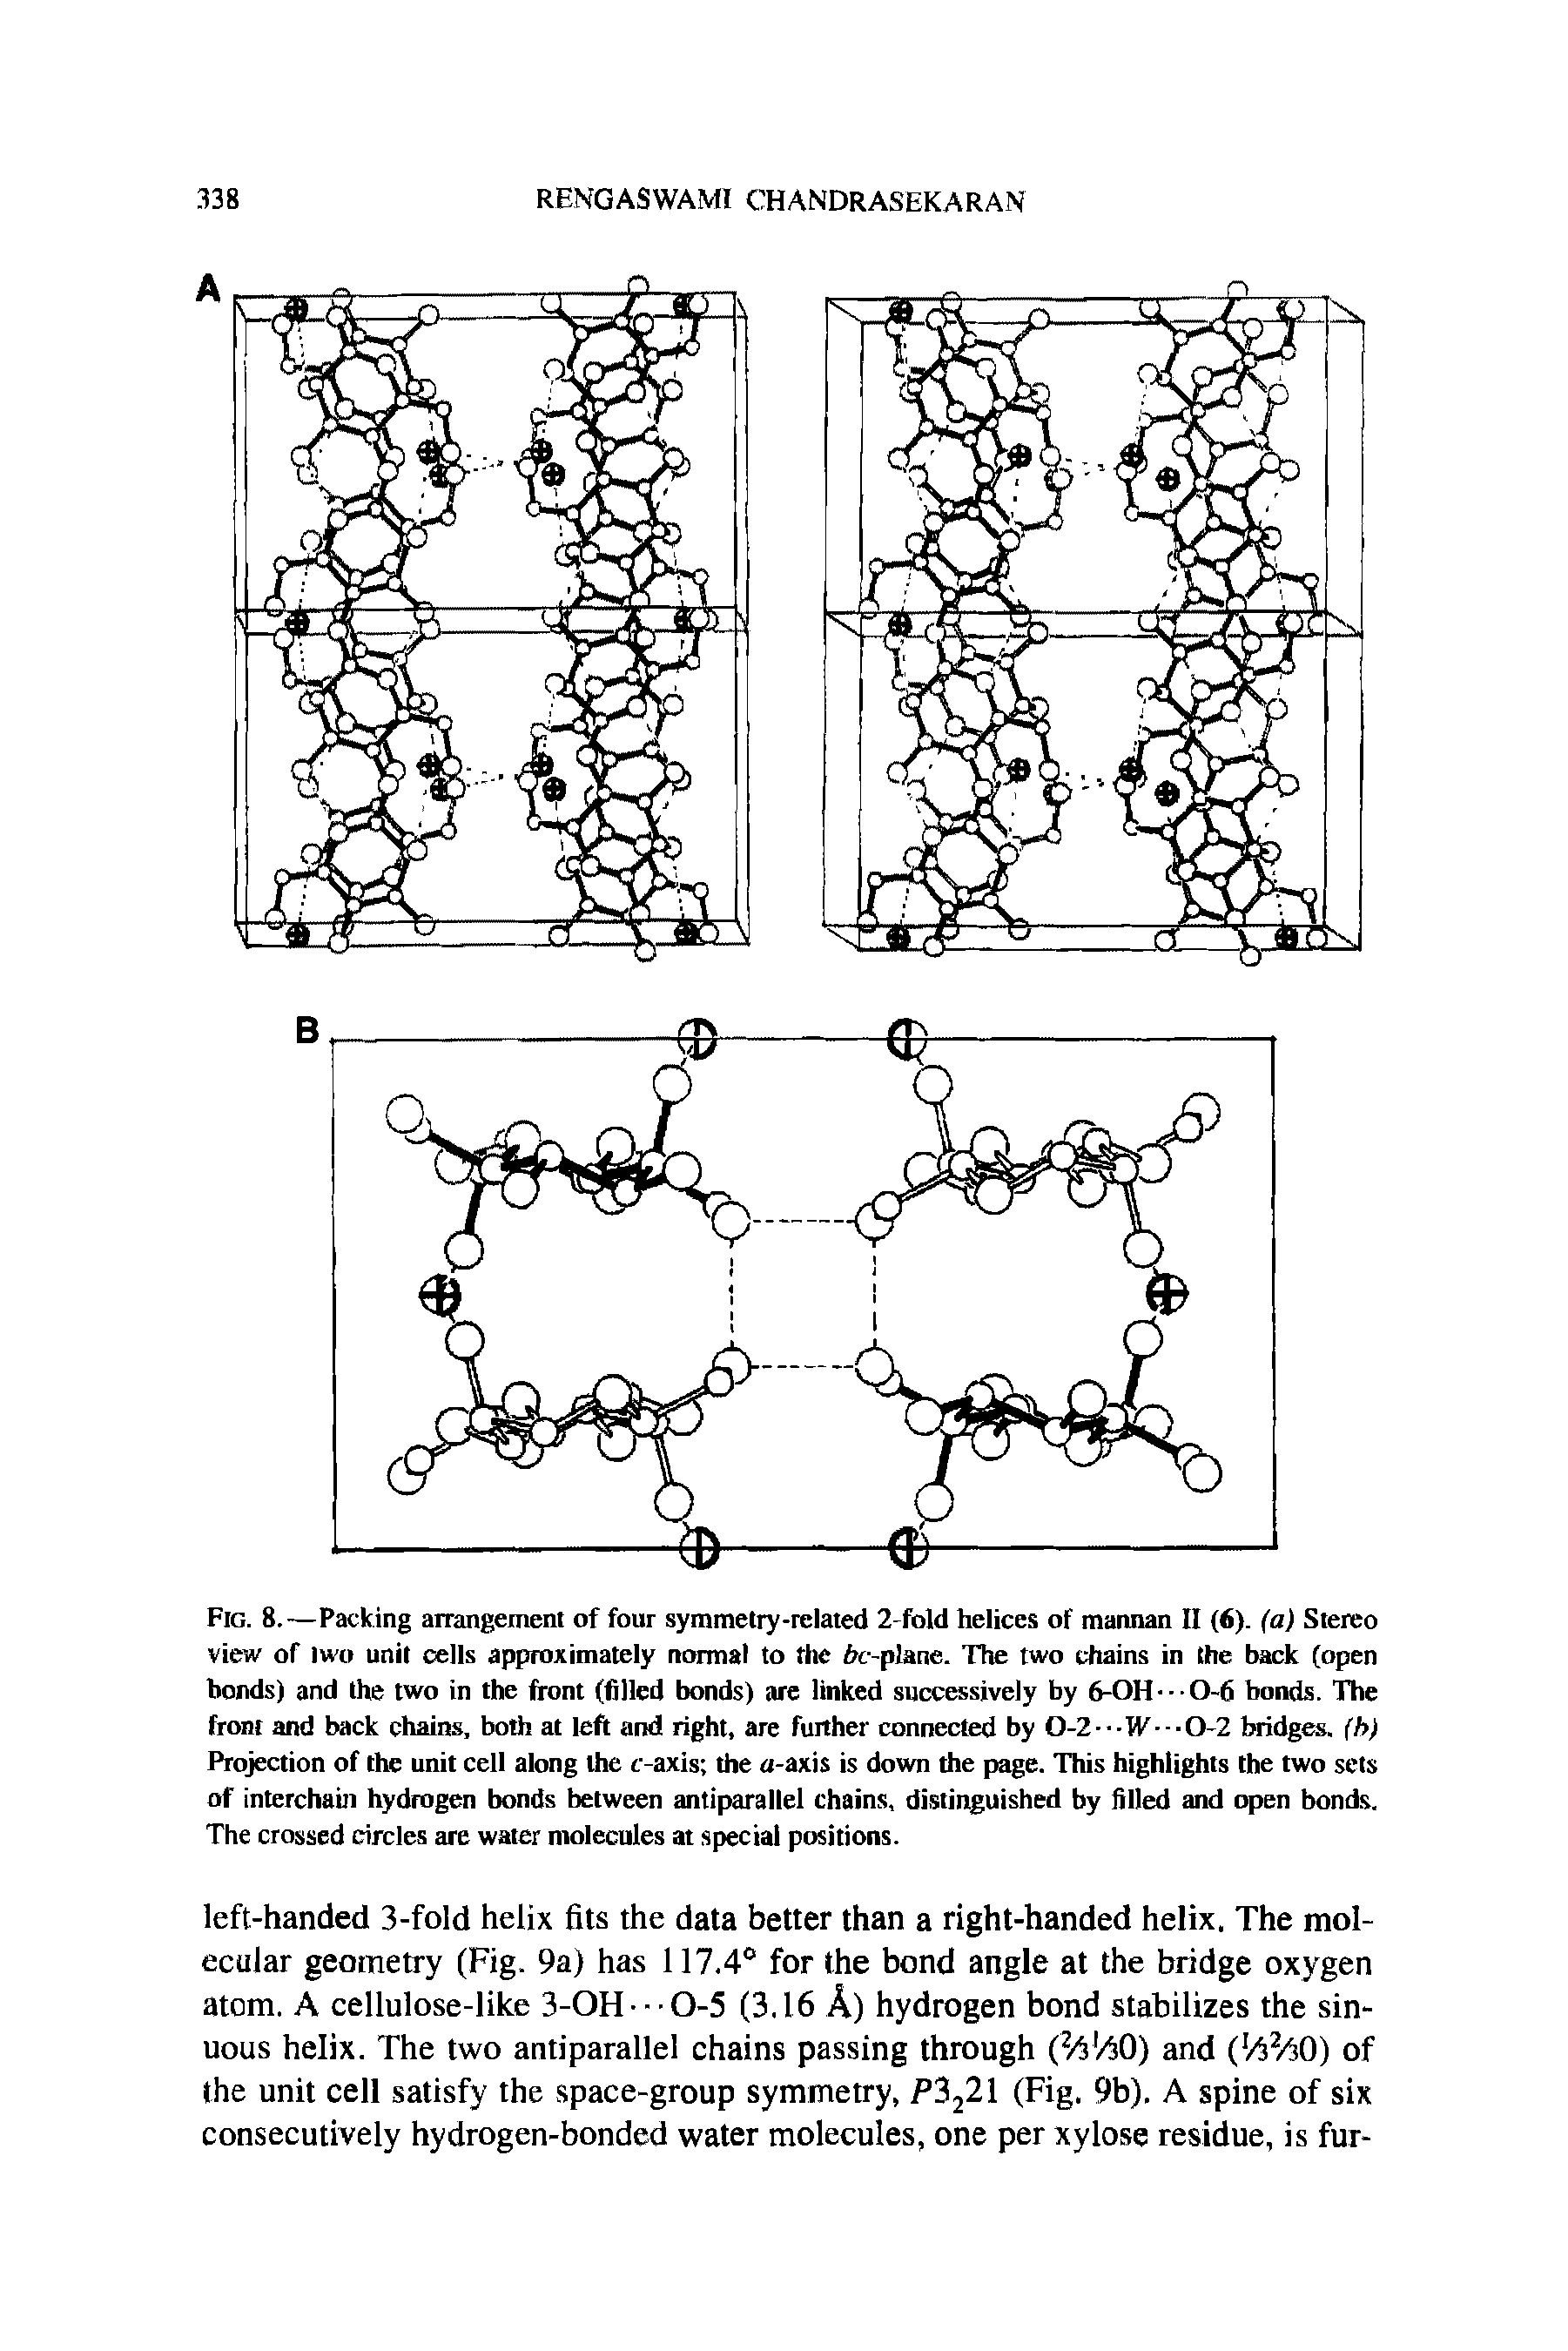 Fig. 8.—Packing arrangement of four symmetry-related 2-fold helices of mannan II (6). (a) Stereo view of two unit cells approximately normal to flic frc-plane. The two chains in the back (open bonds) and the two in the front (filled bonds) are linked successively by 6-0H-- 0-6 bonds. The front and back chains, both at left and right, are further connected by 0-2 -1V -0-2 bridges, (h) Projection of the unit cell along the c-axis the a-axis is down the page. This highlights the two sets of interchain hydrogen bonds between antiparallel chains, distinguished by filled and open bonds. The crossed circles are water molecules at special positions.